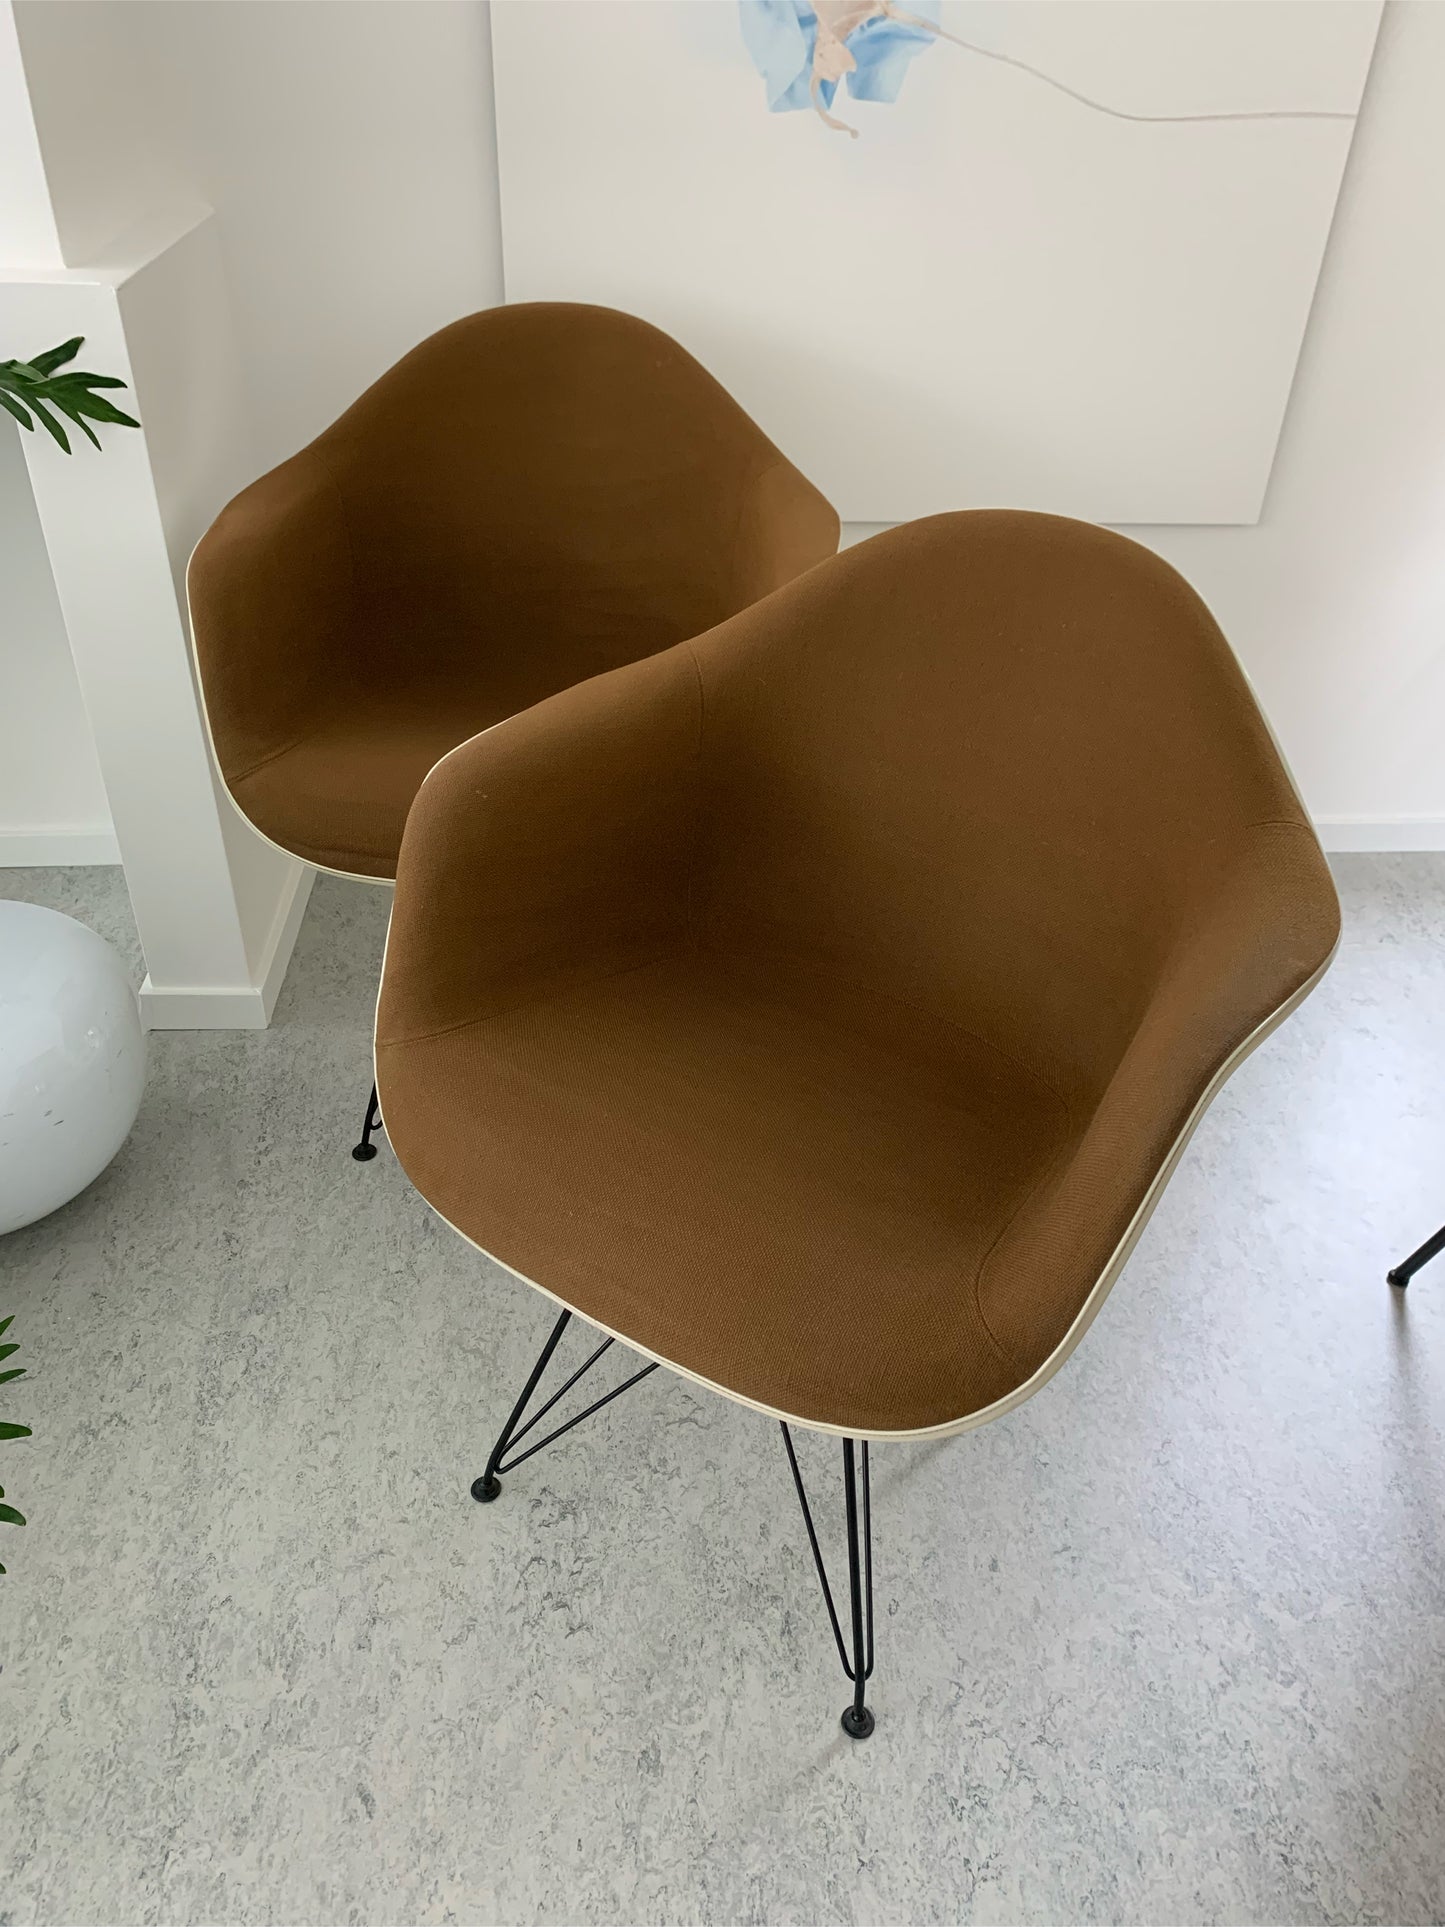 2 DSR Eames Shell chairs